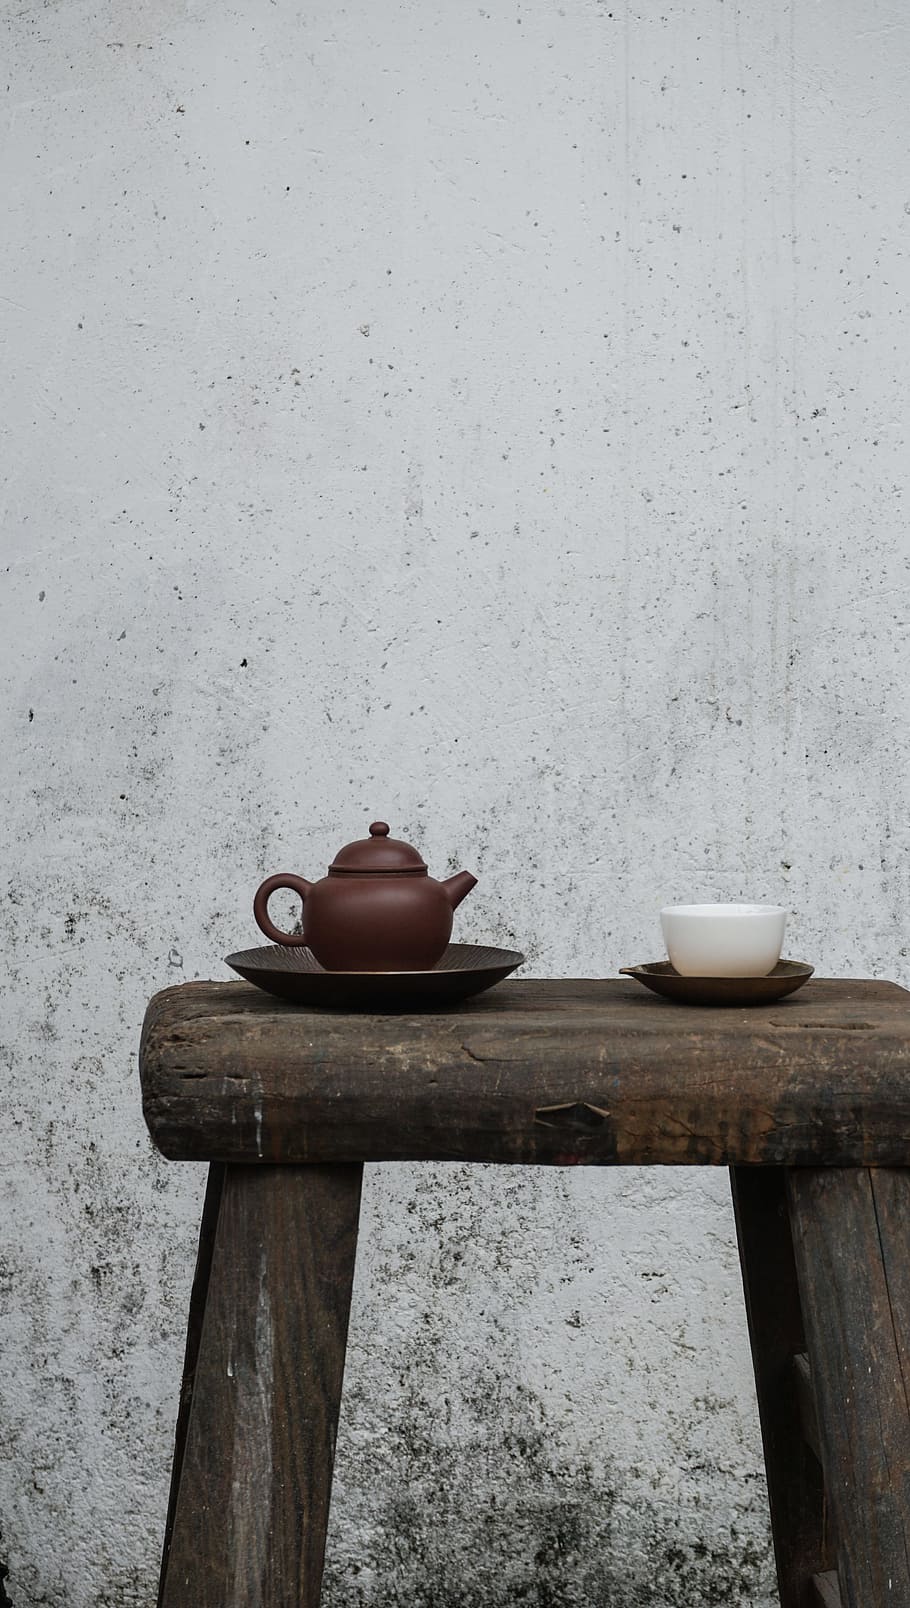 brown teapot, cup, wall, grey, decoration, wood, traditional